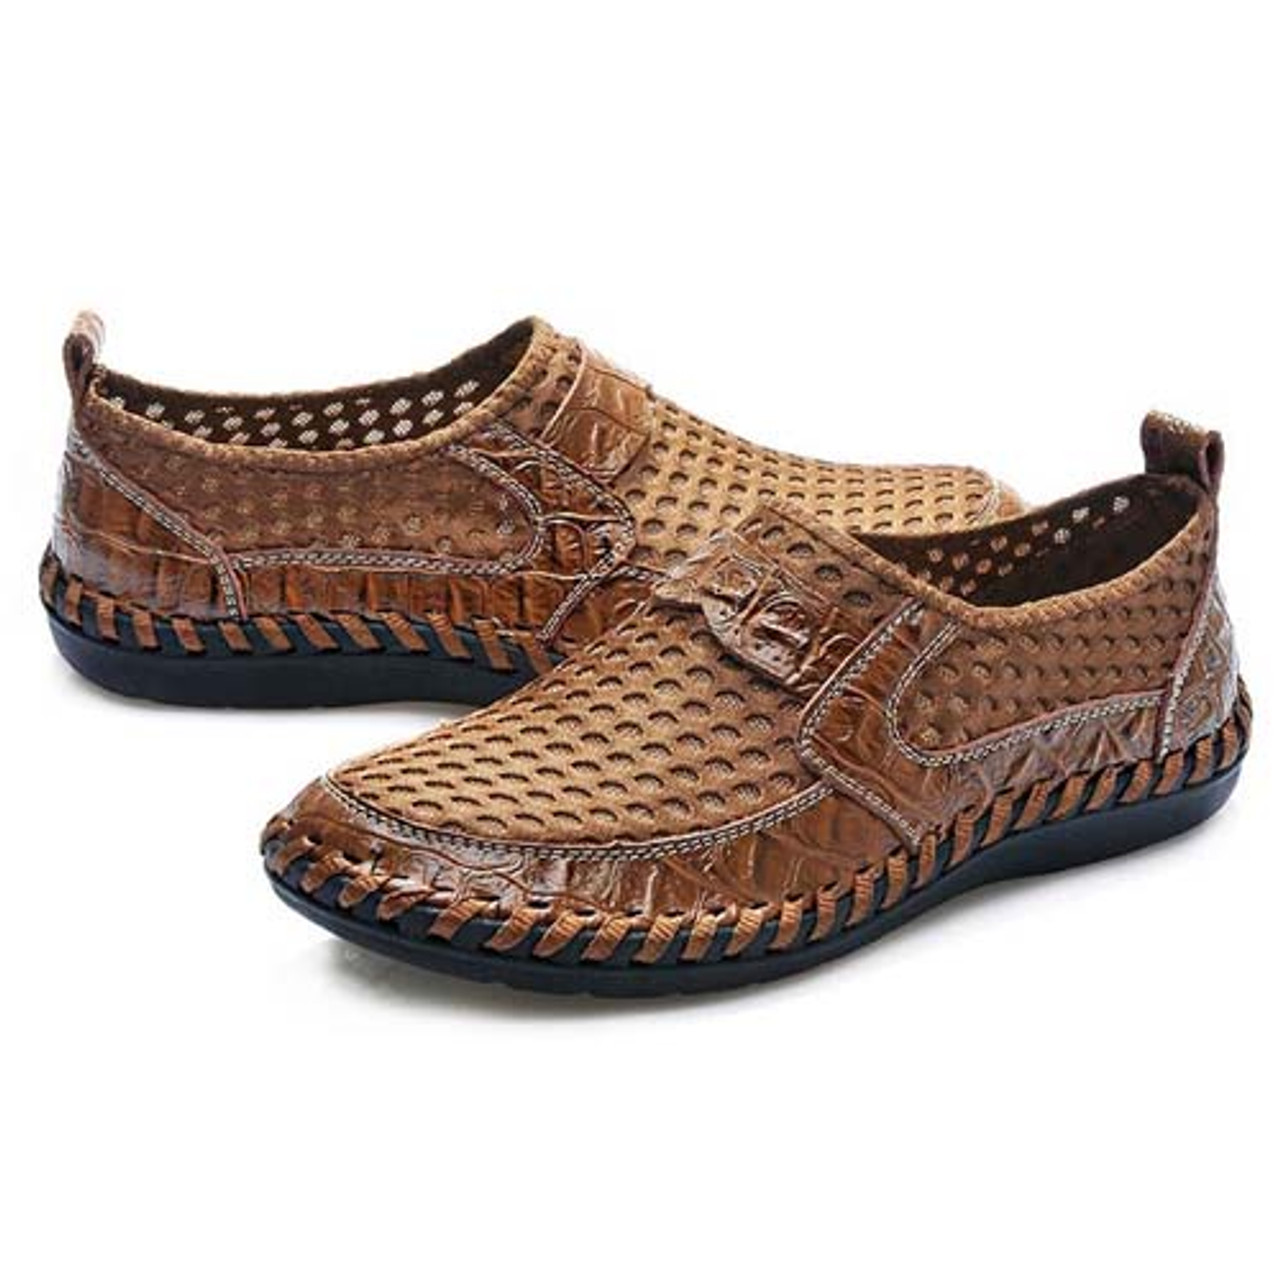 Men's brown casual mesh leather slip on shoe | Mens slip on loafers ...